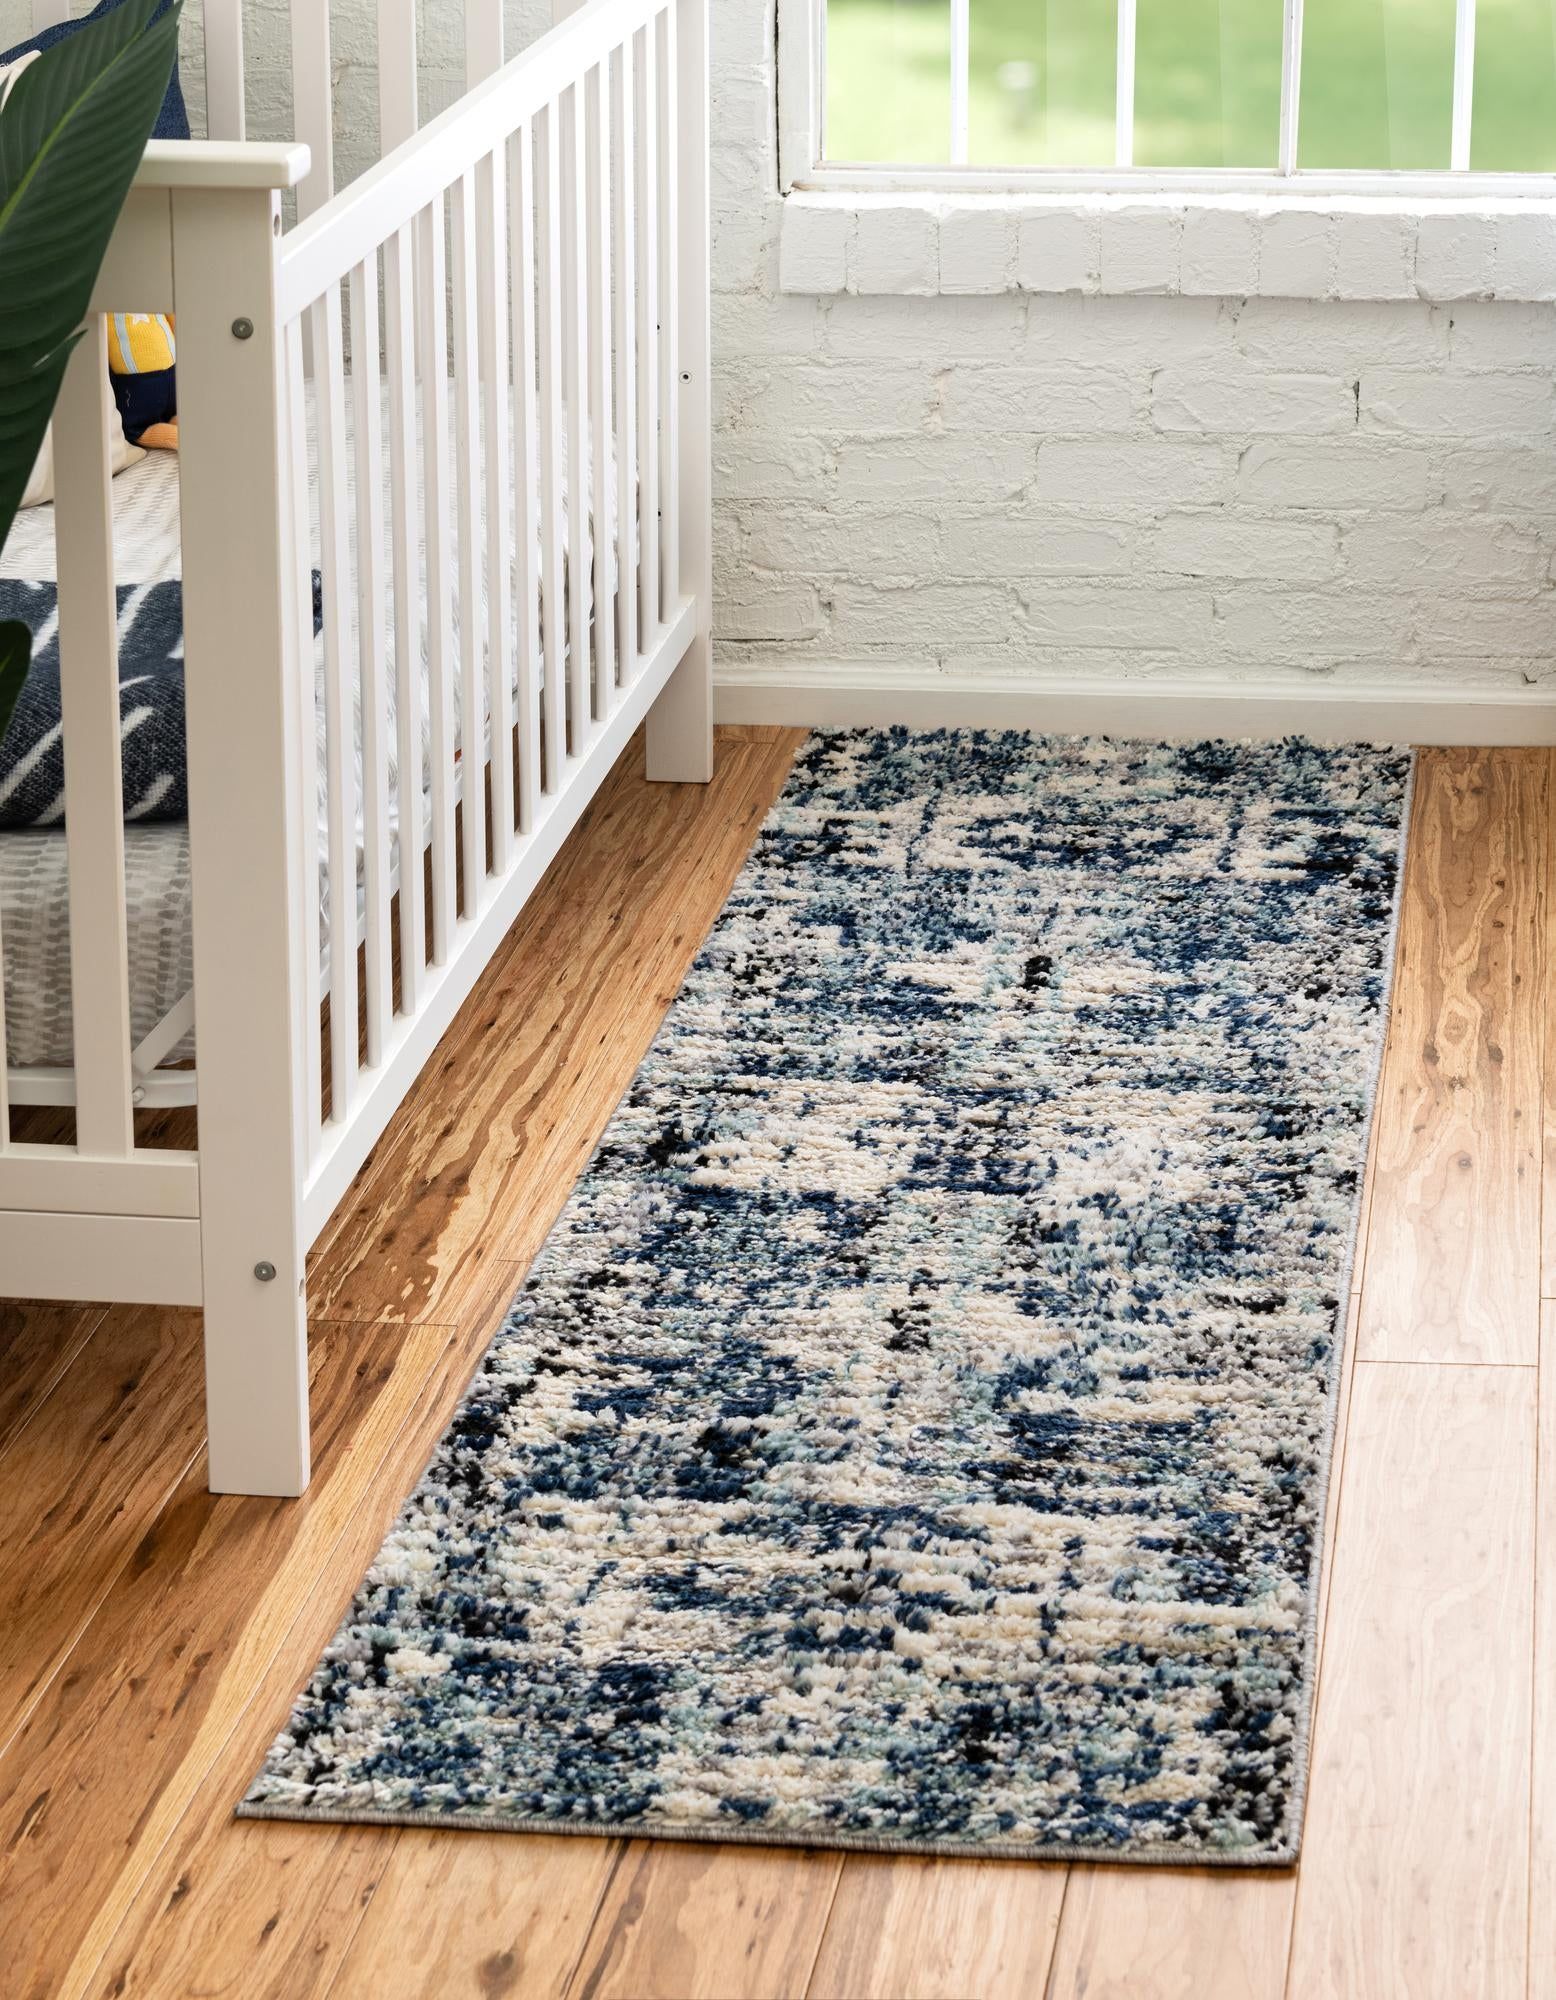 Blue 60cm X 183cm Tucson Runner Rug | Irugs Ch With Blue Tucson Rugs (View 5 of 15)